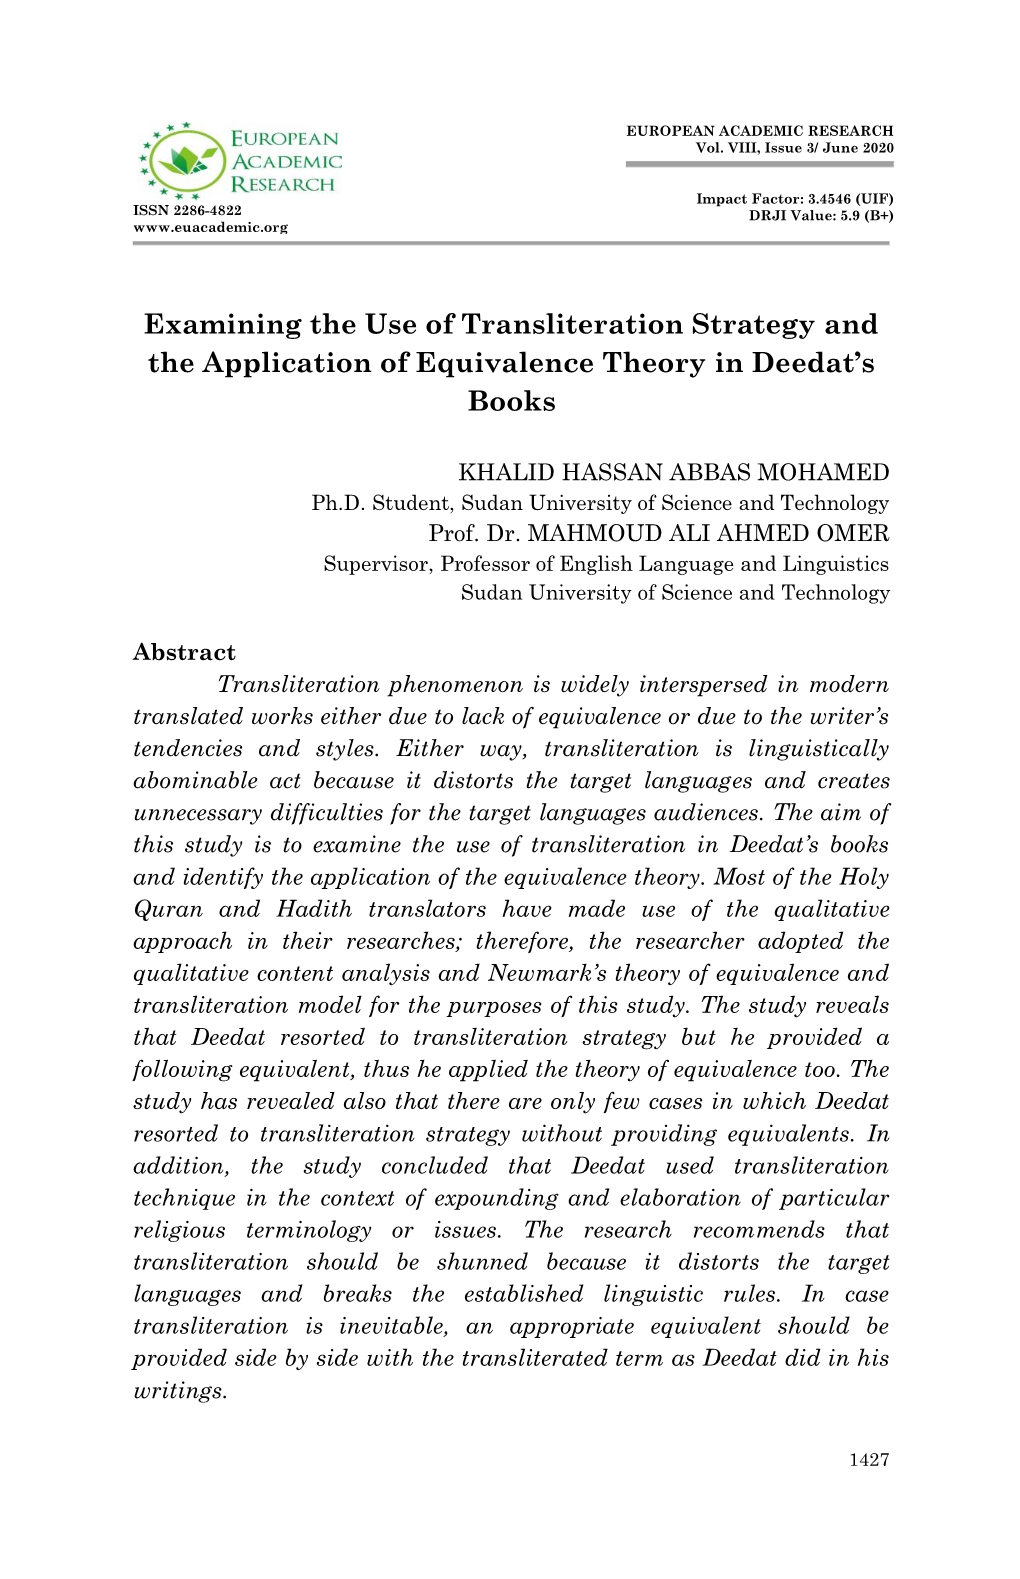 Examining the Use of Transliteration Strategy and the Application of Equivalence Theory in Deedat’S Books